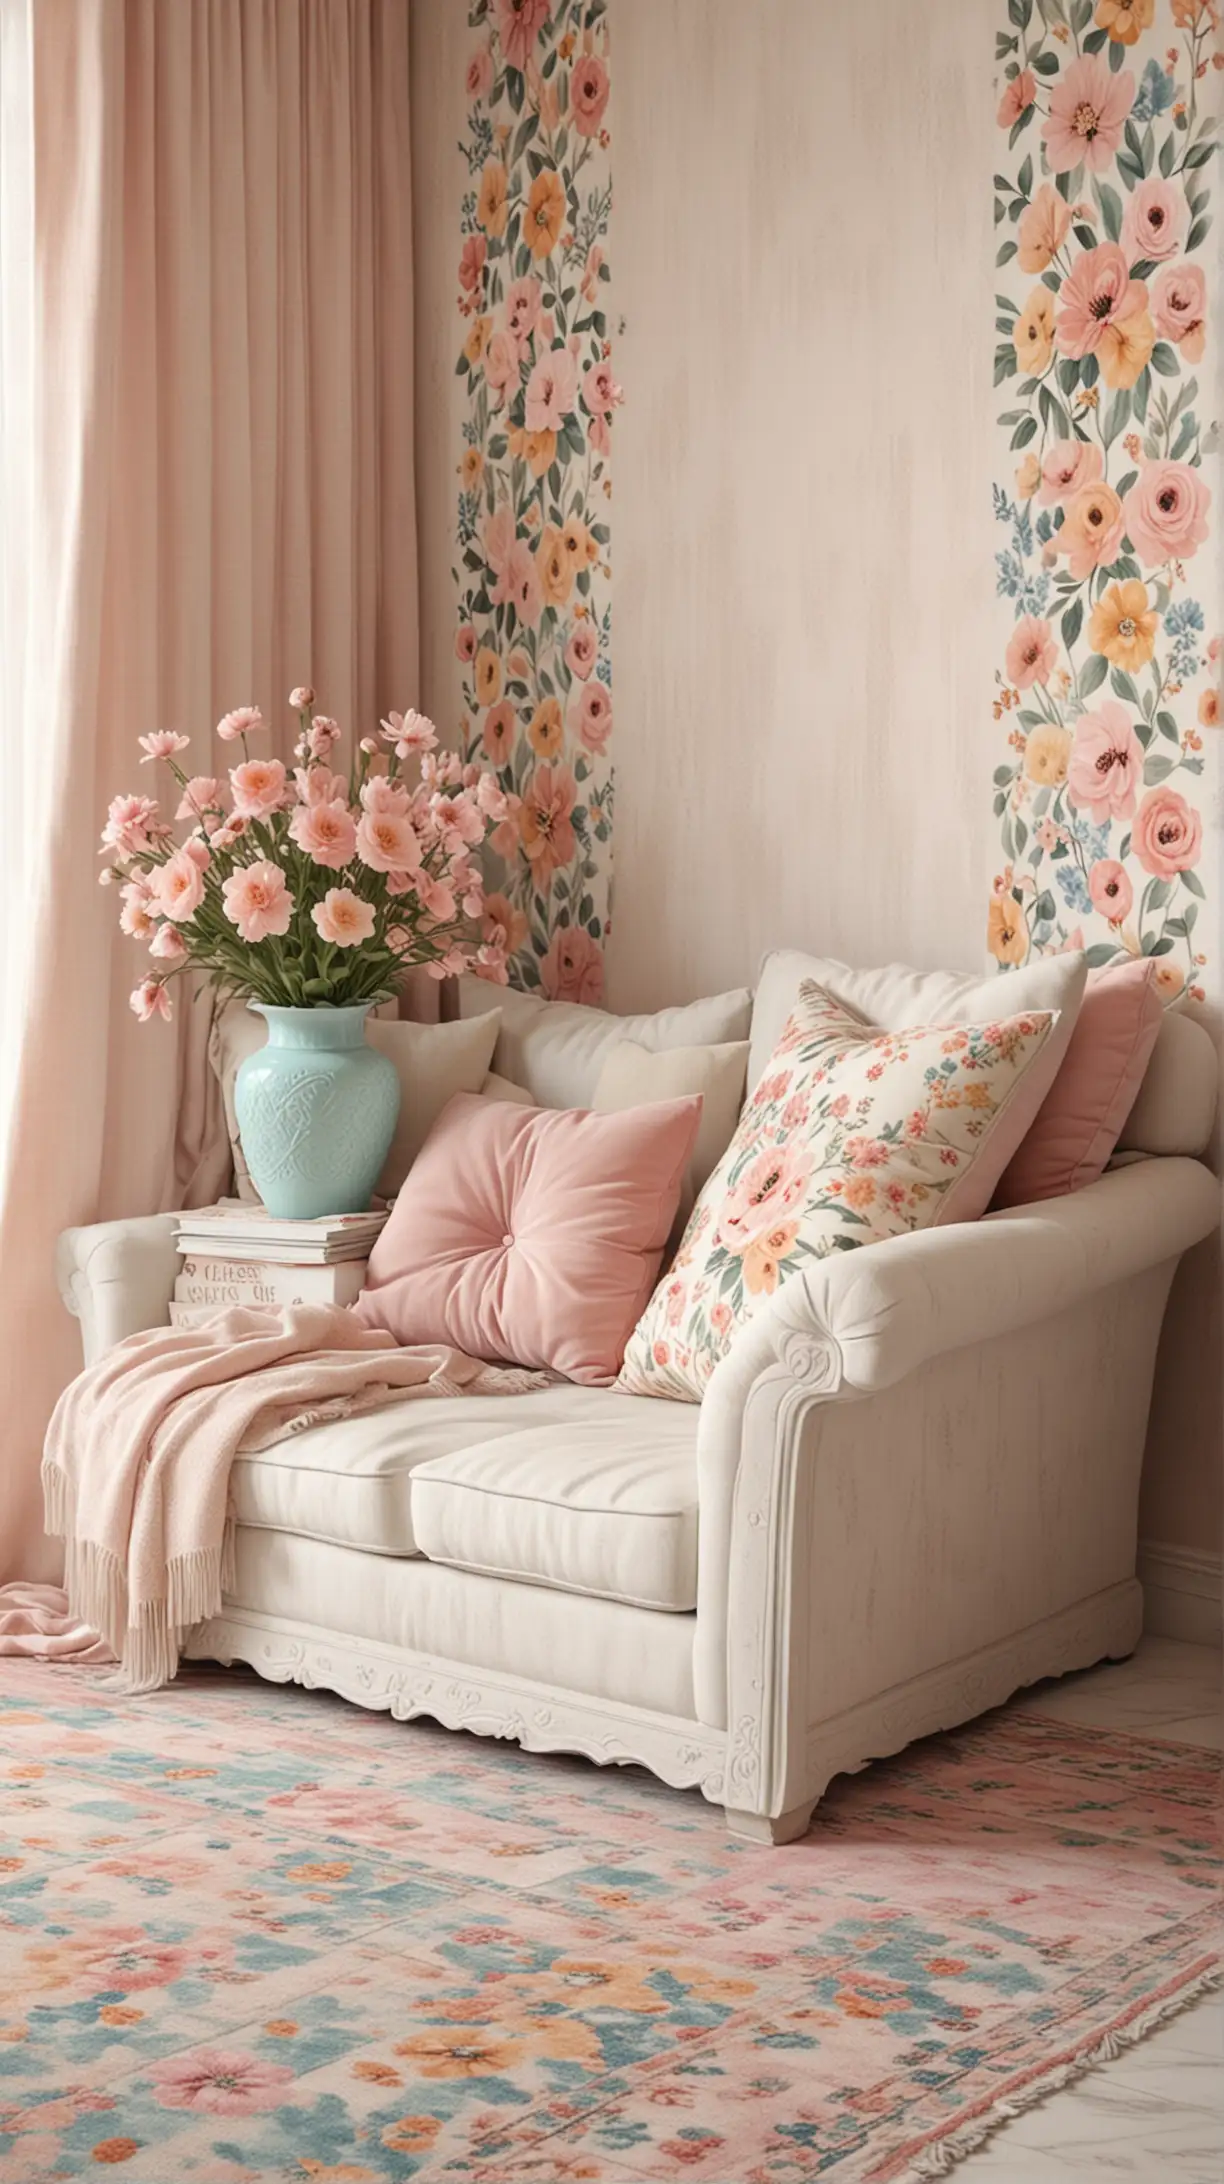 Cozy Shabby Chic Living Room with Floral Accents and Soft Pastel Vibes